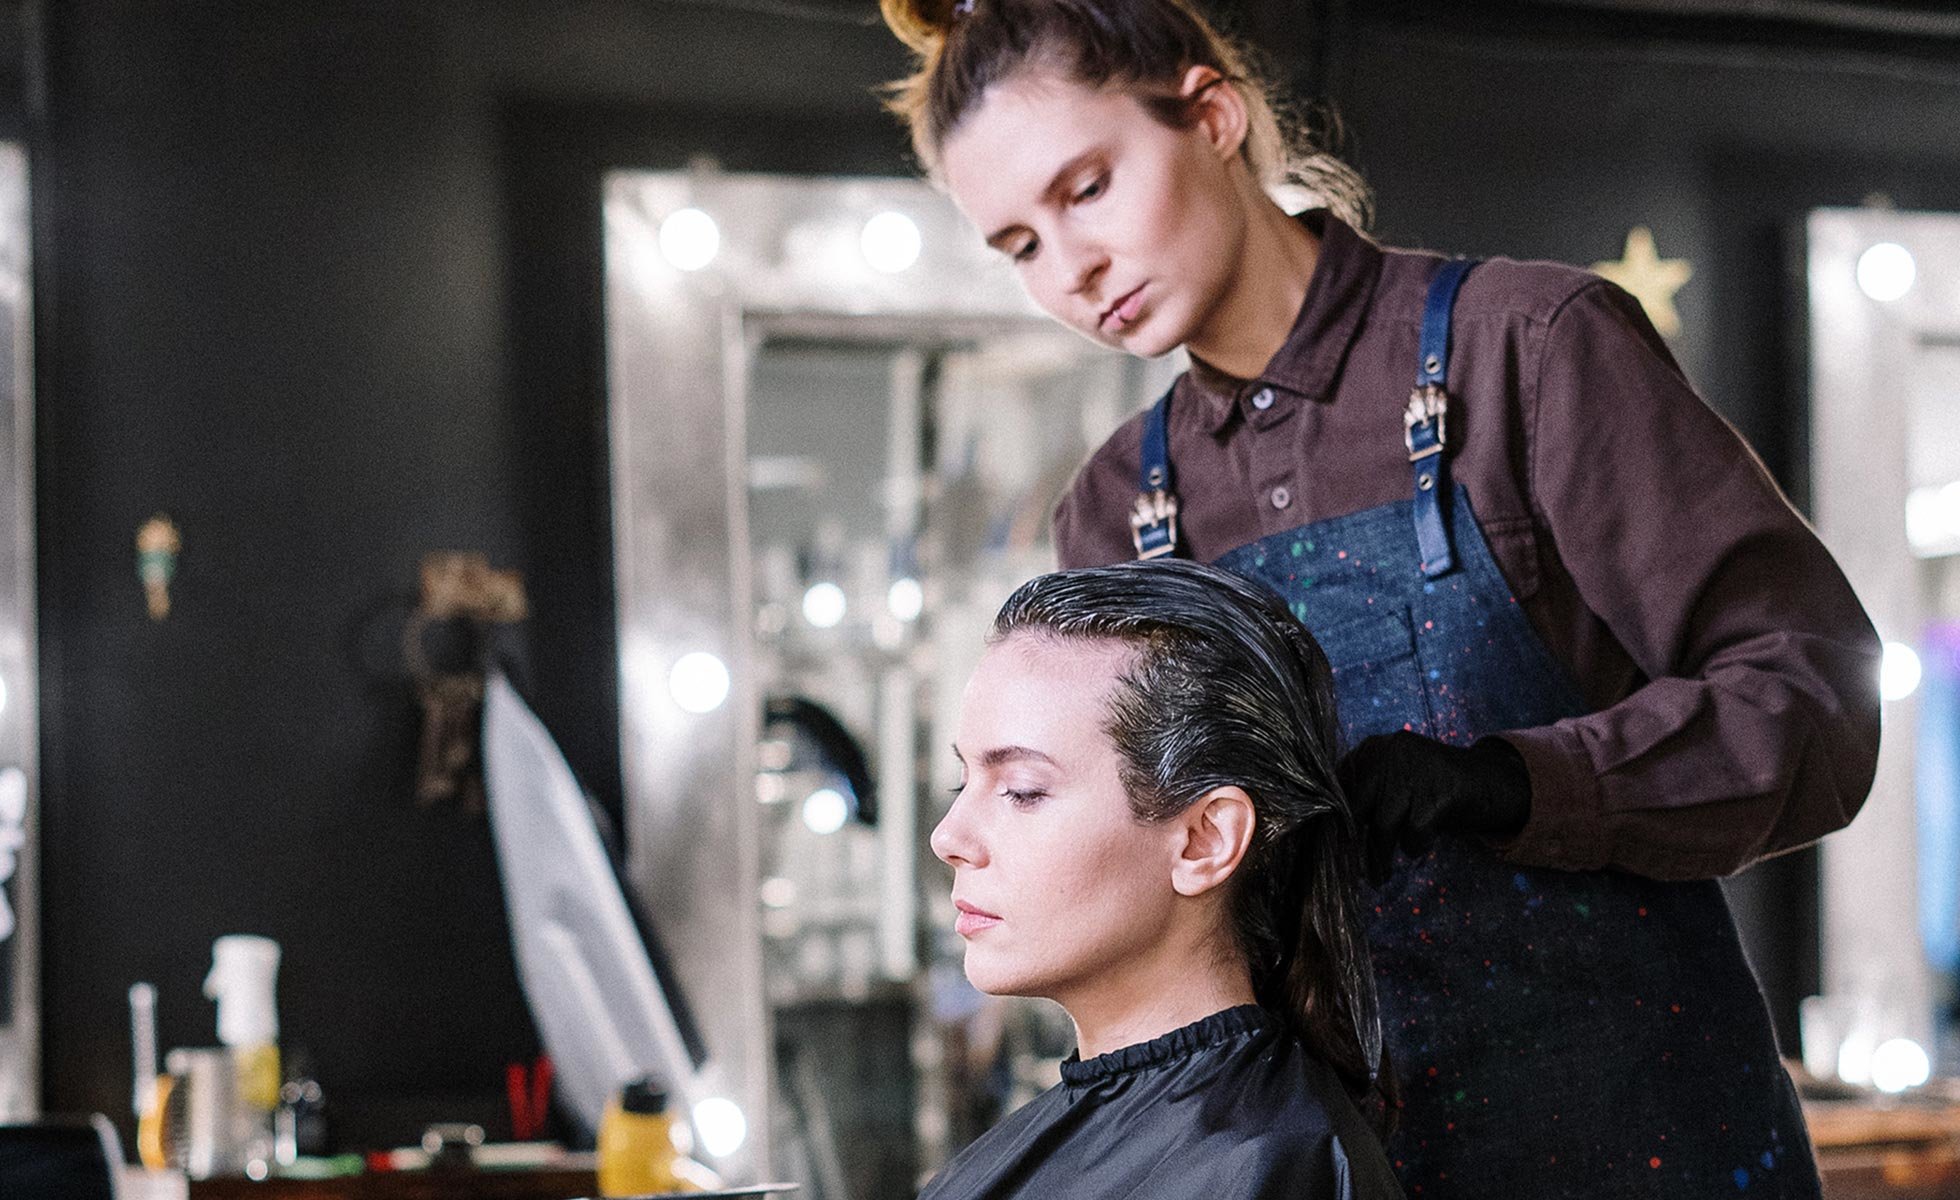 4 Salon Etiquette Tips Your Hairstylist Wish You Knew | Beautylish